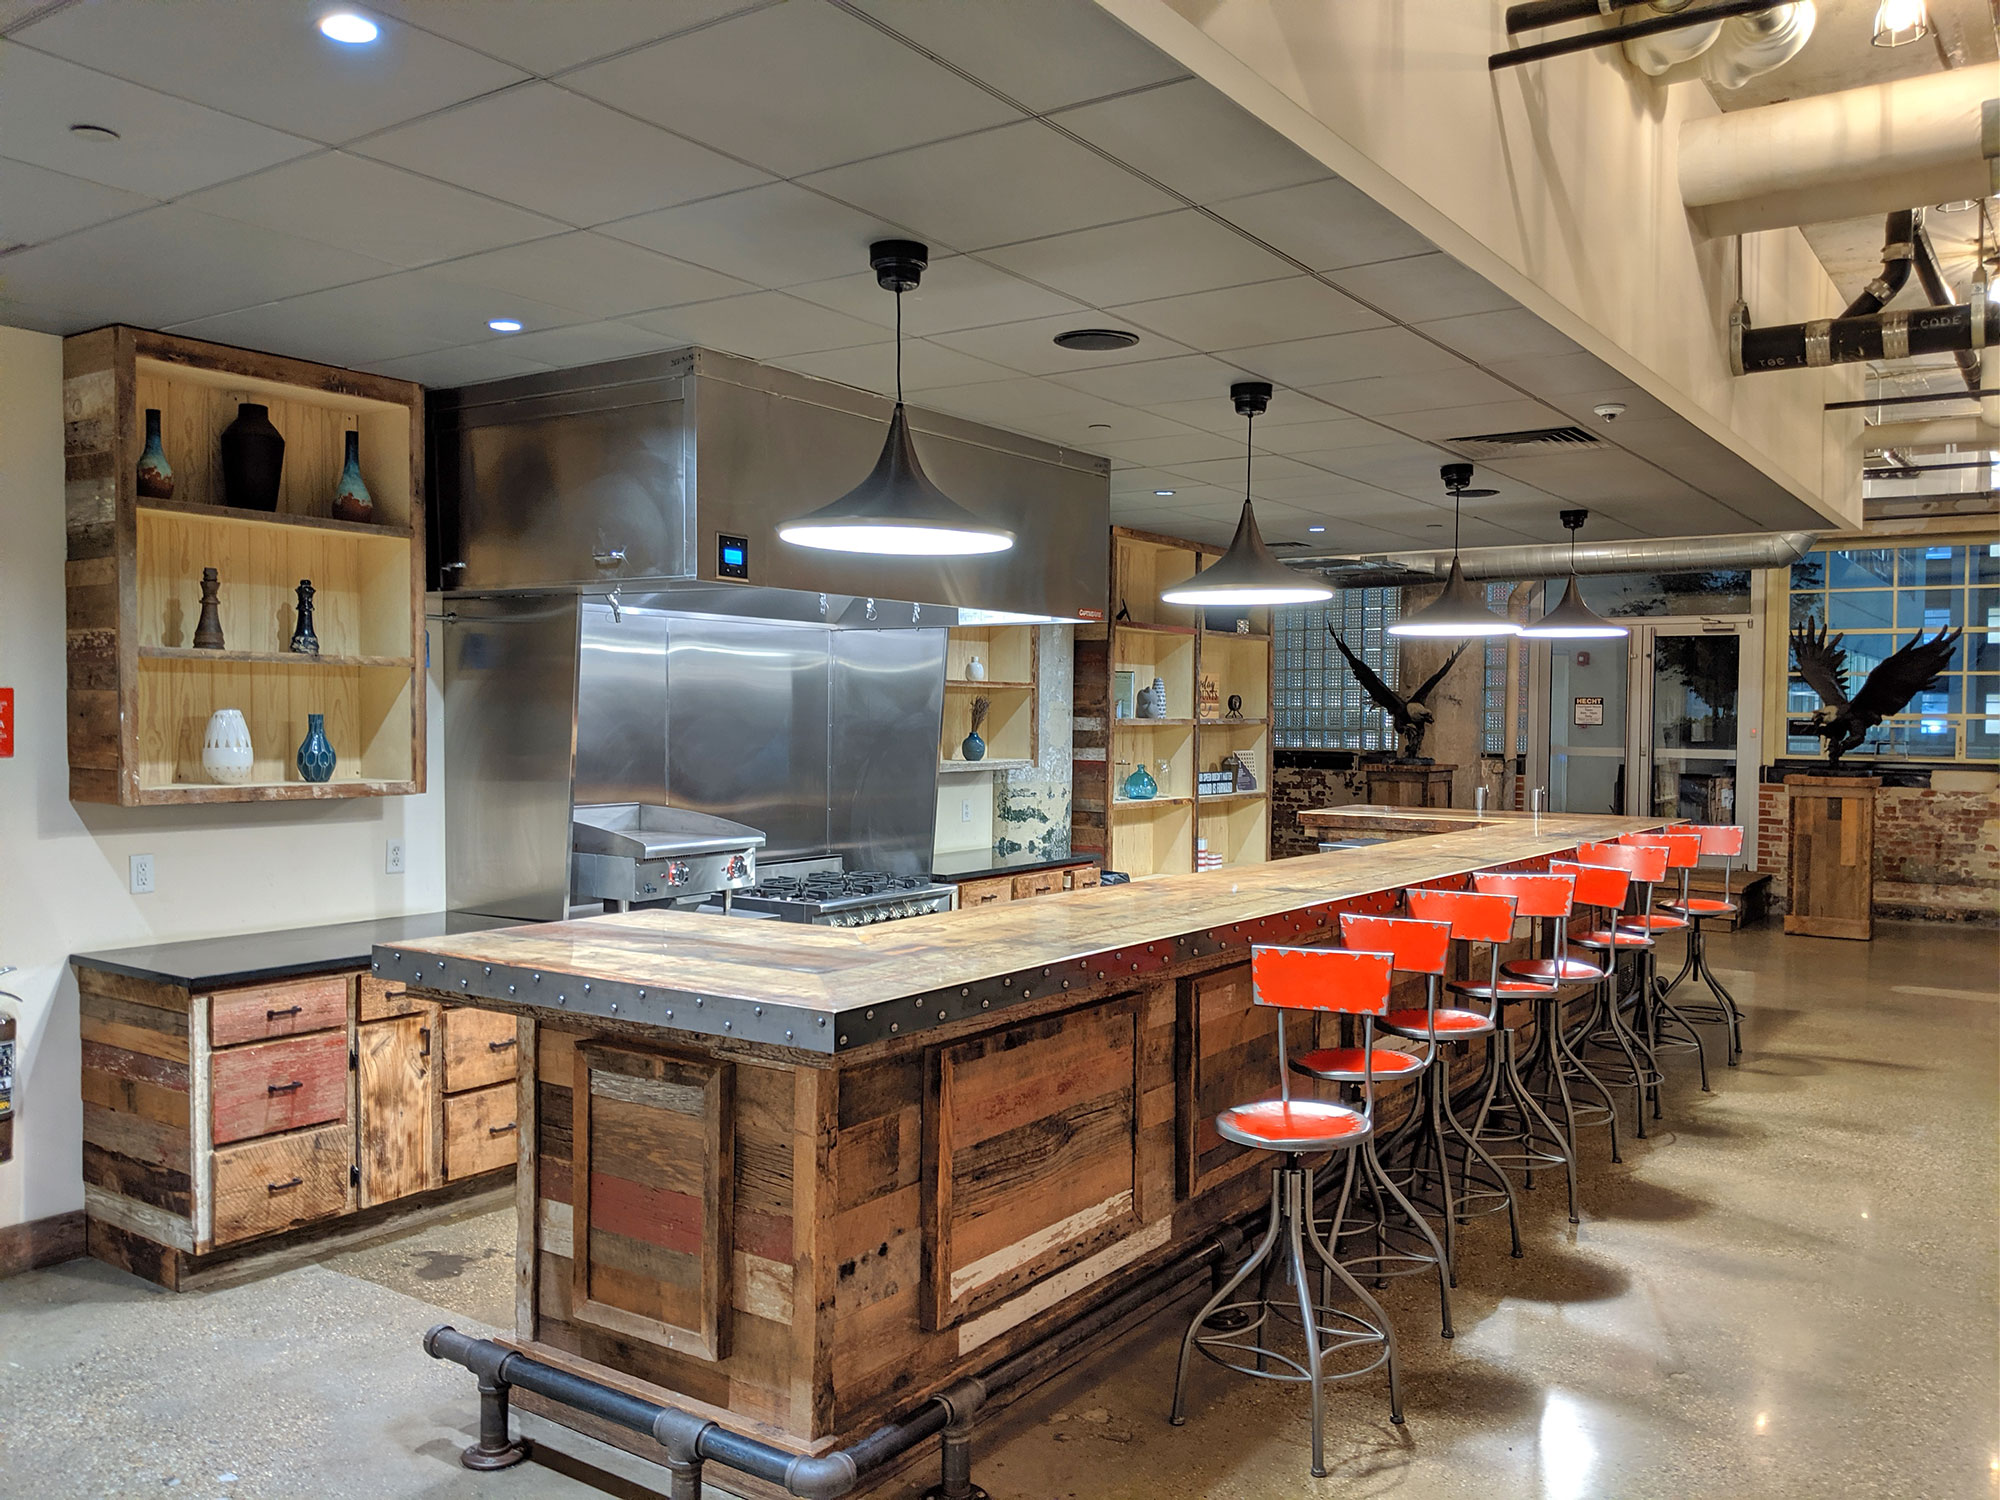 The chef's kitchen at the Hecht Warehouse in Ivy City.